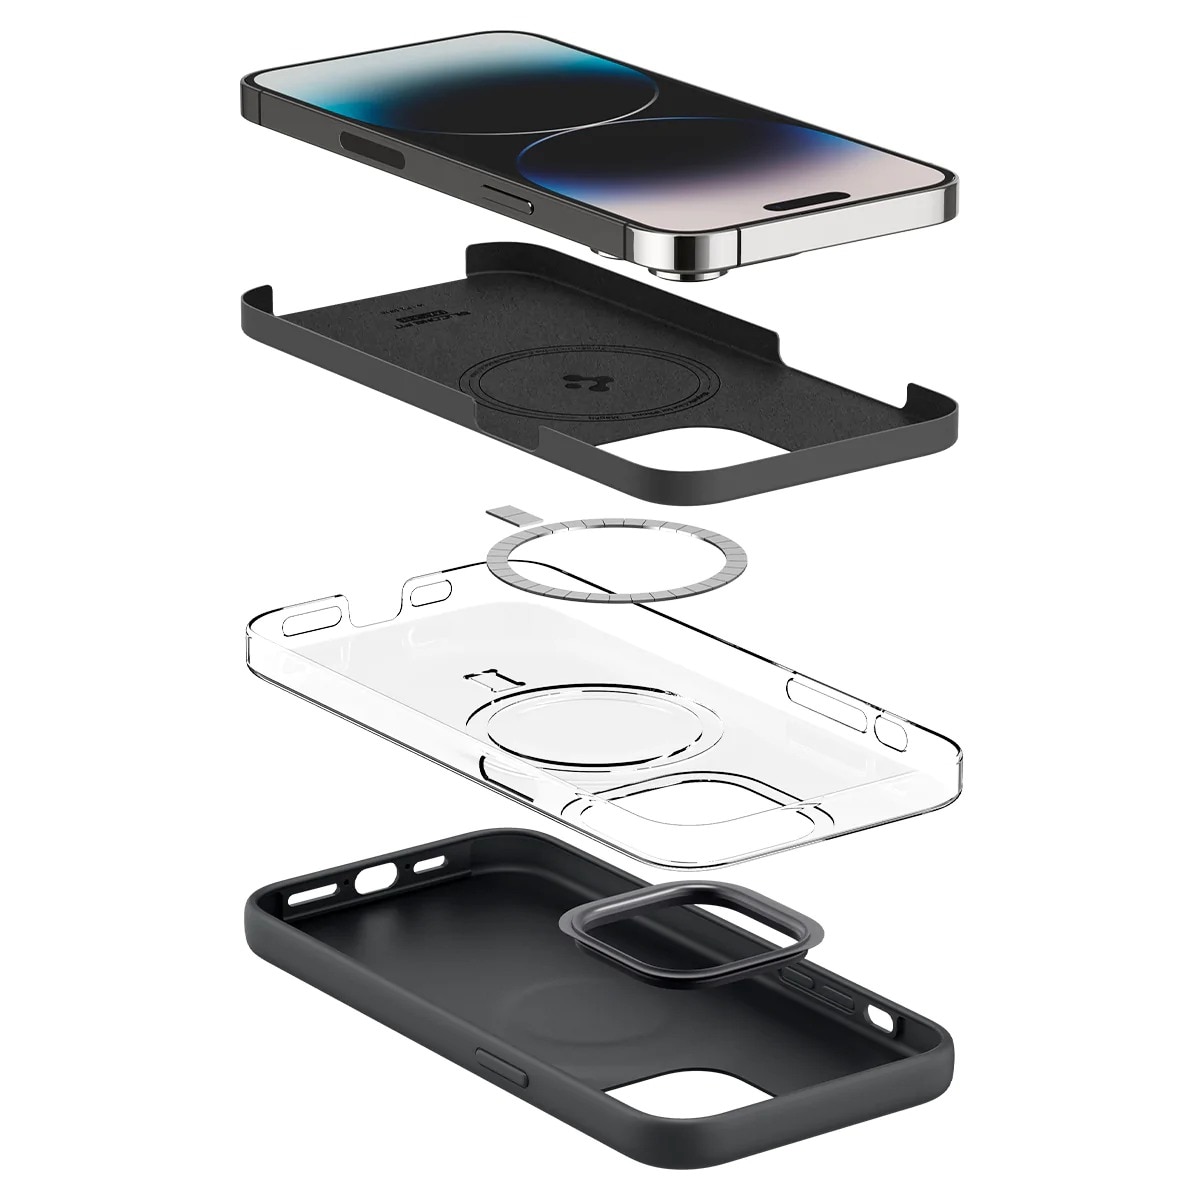 Case Silicone Fit Mag iPhone 14 Pro Zwart